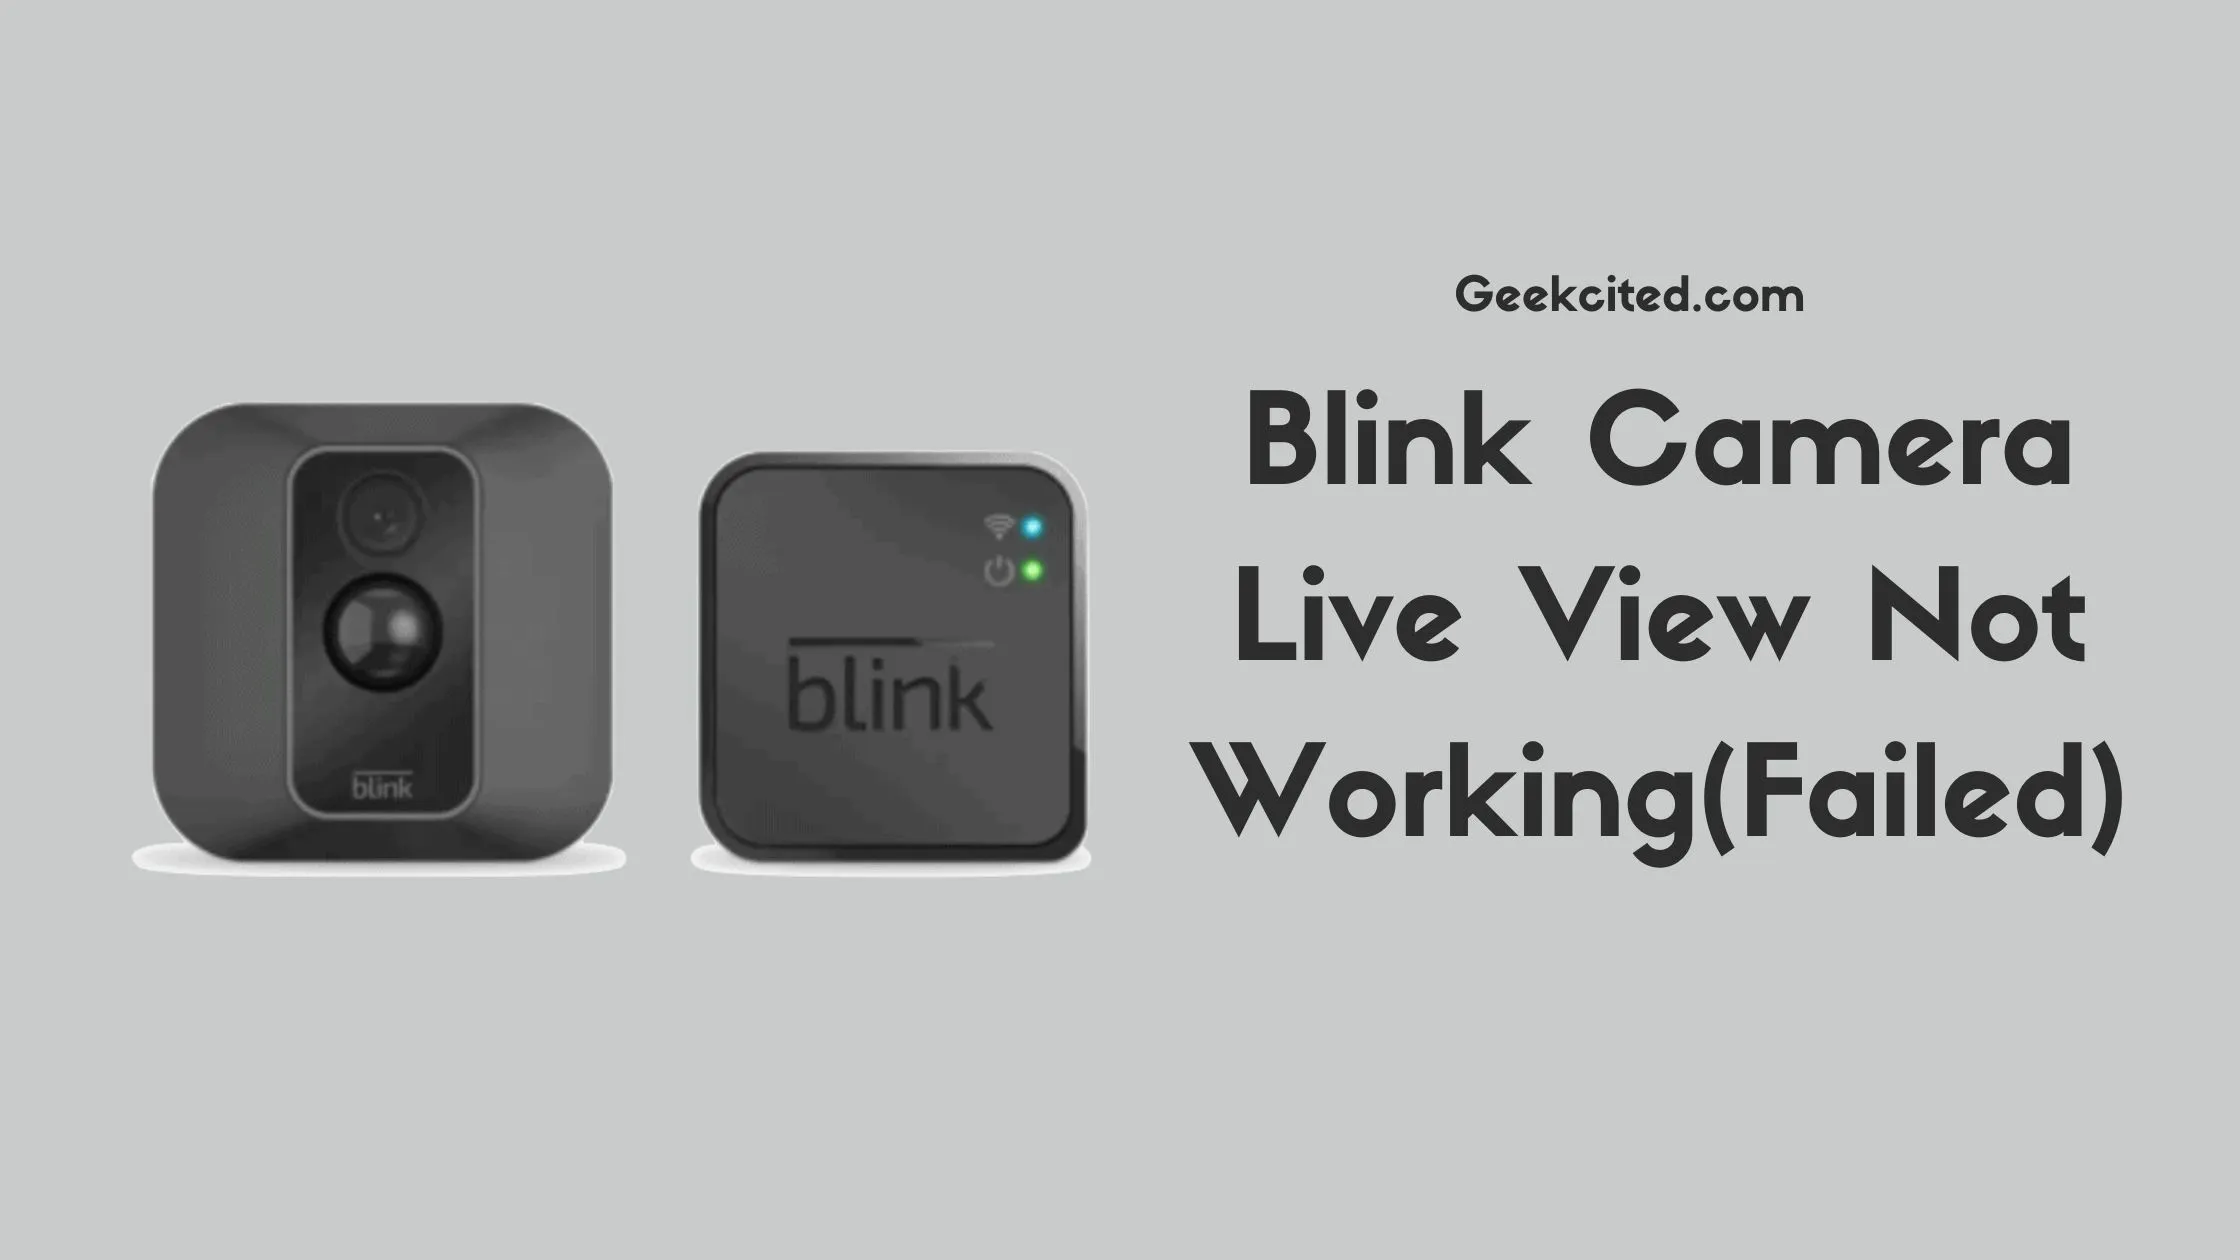 Blink Camera Live View Not Working(Failed)